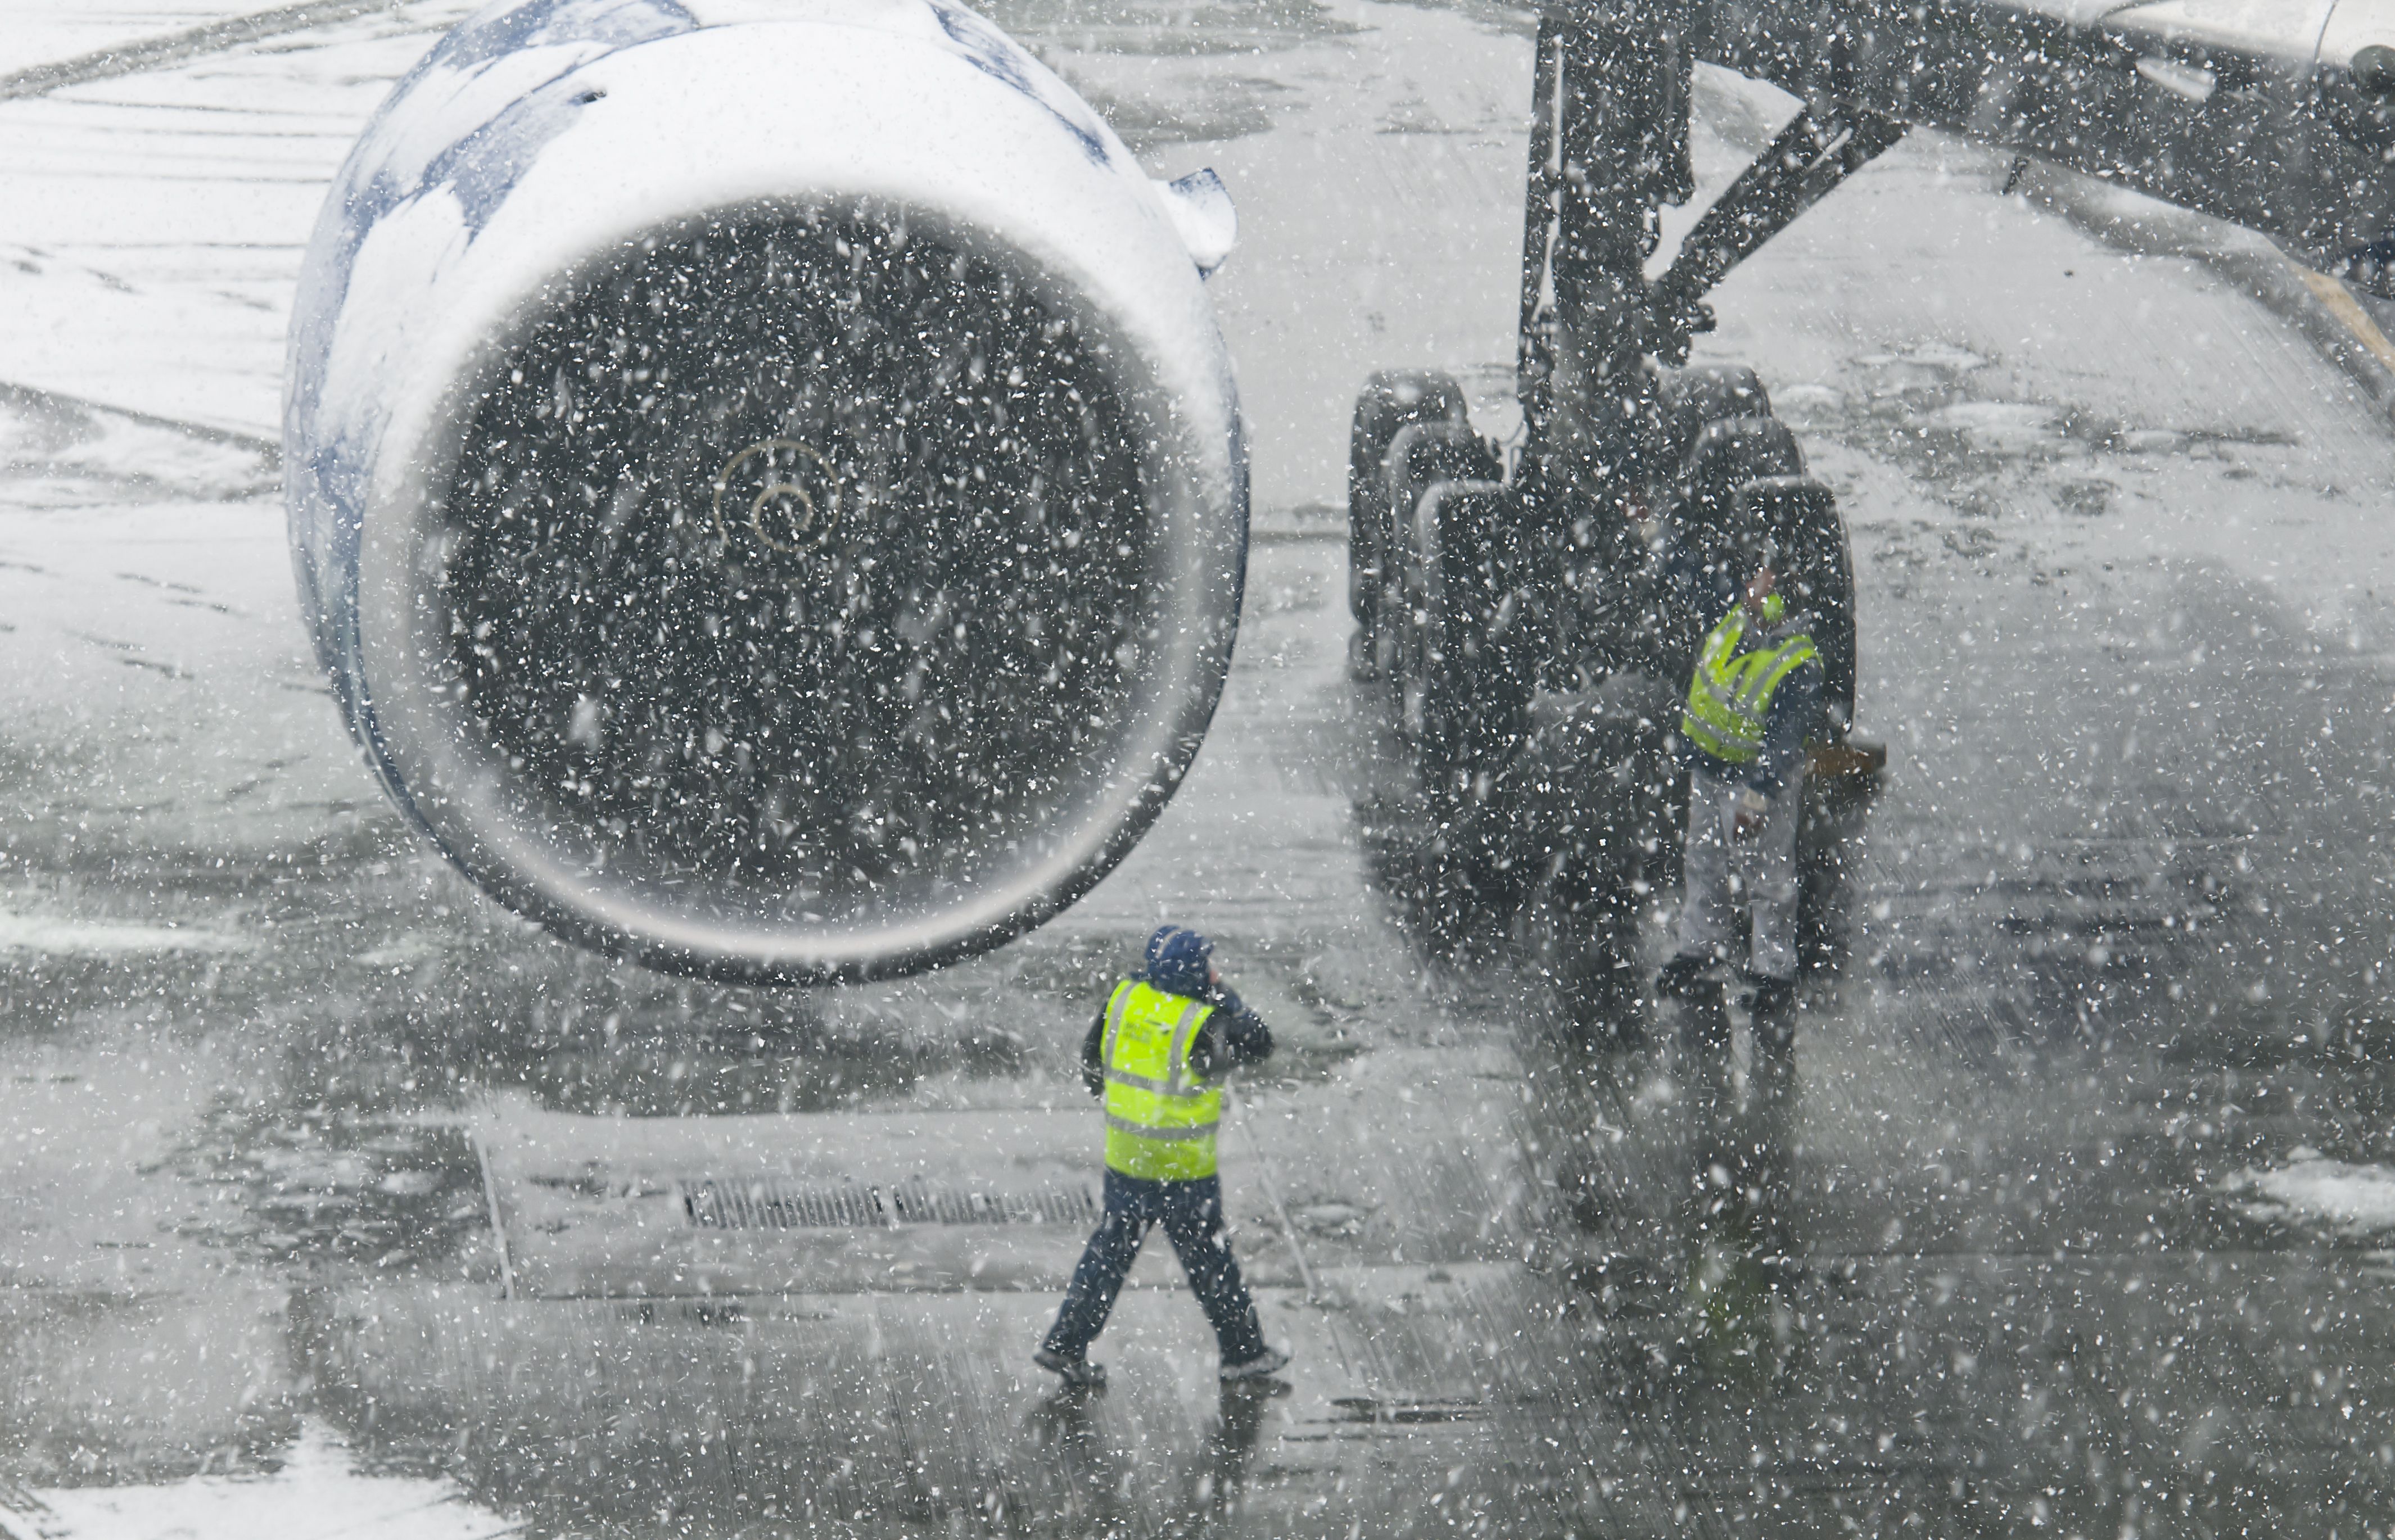 Ground handlers attending an aircraft during a snow storm.